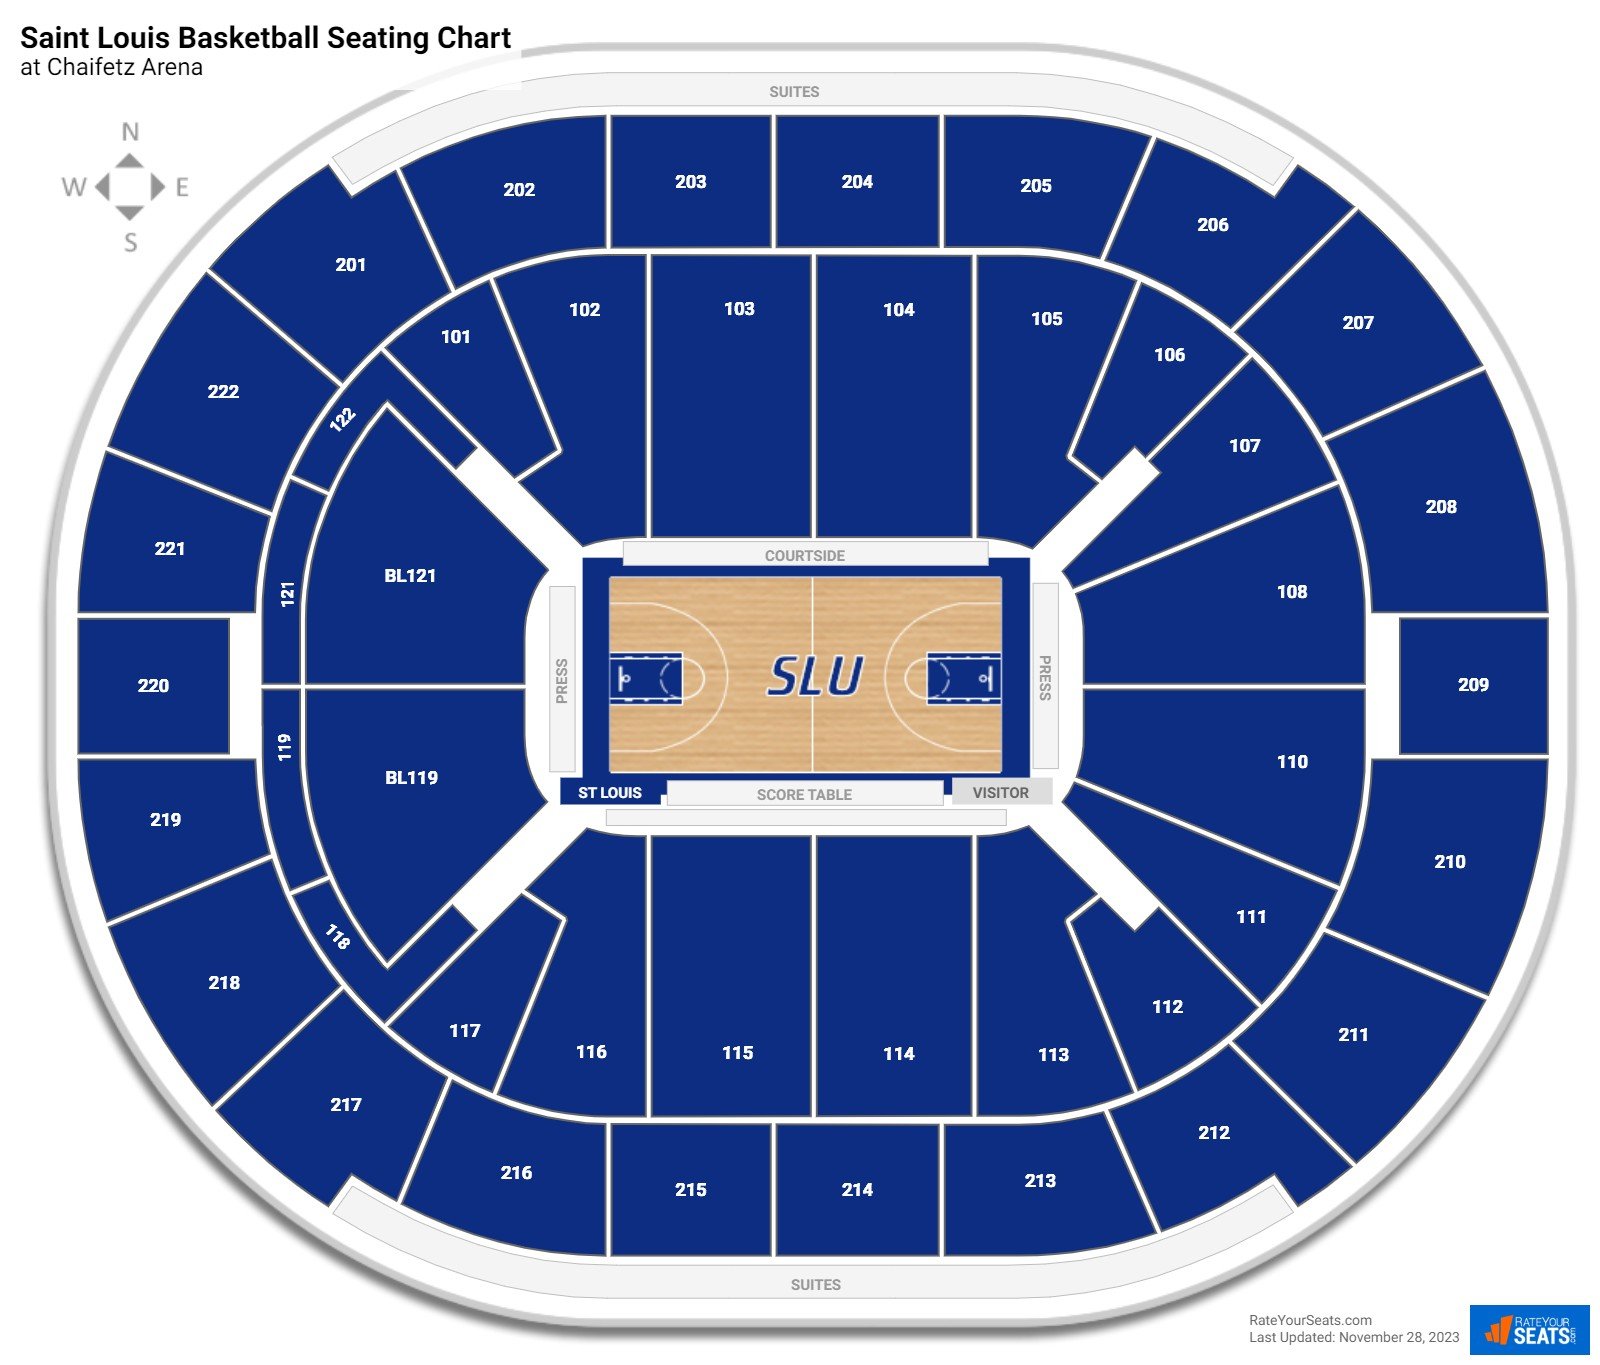 St. Louis Billikens Seating Chart at Chaifetz Arena